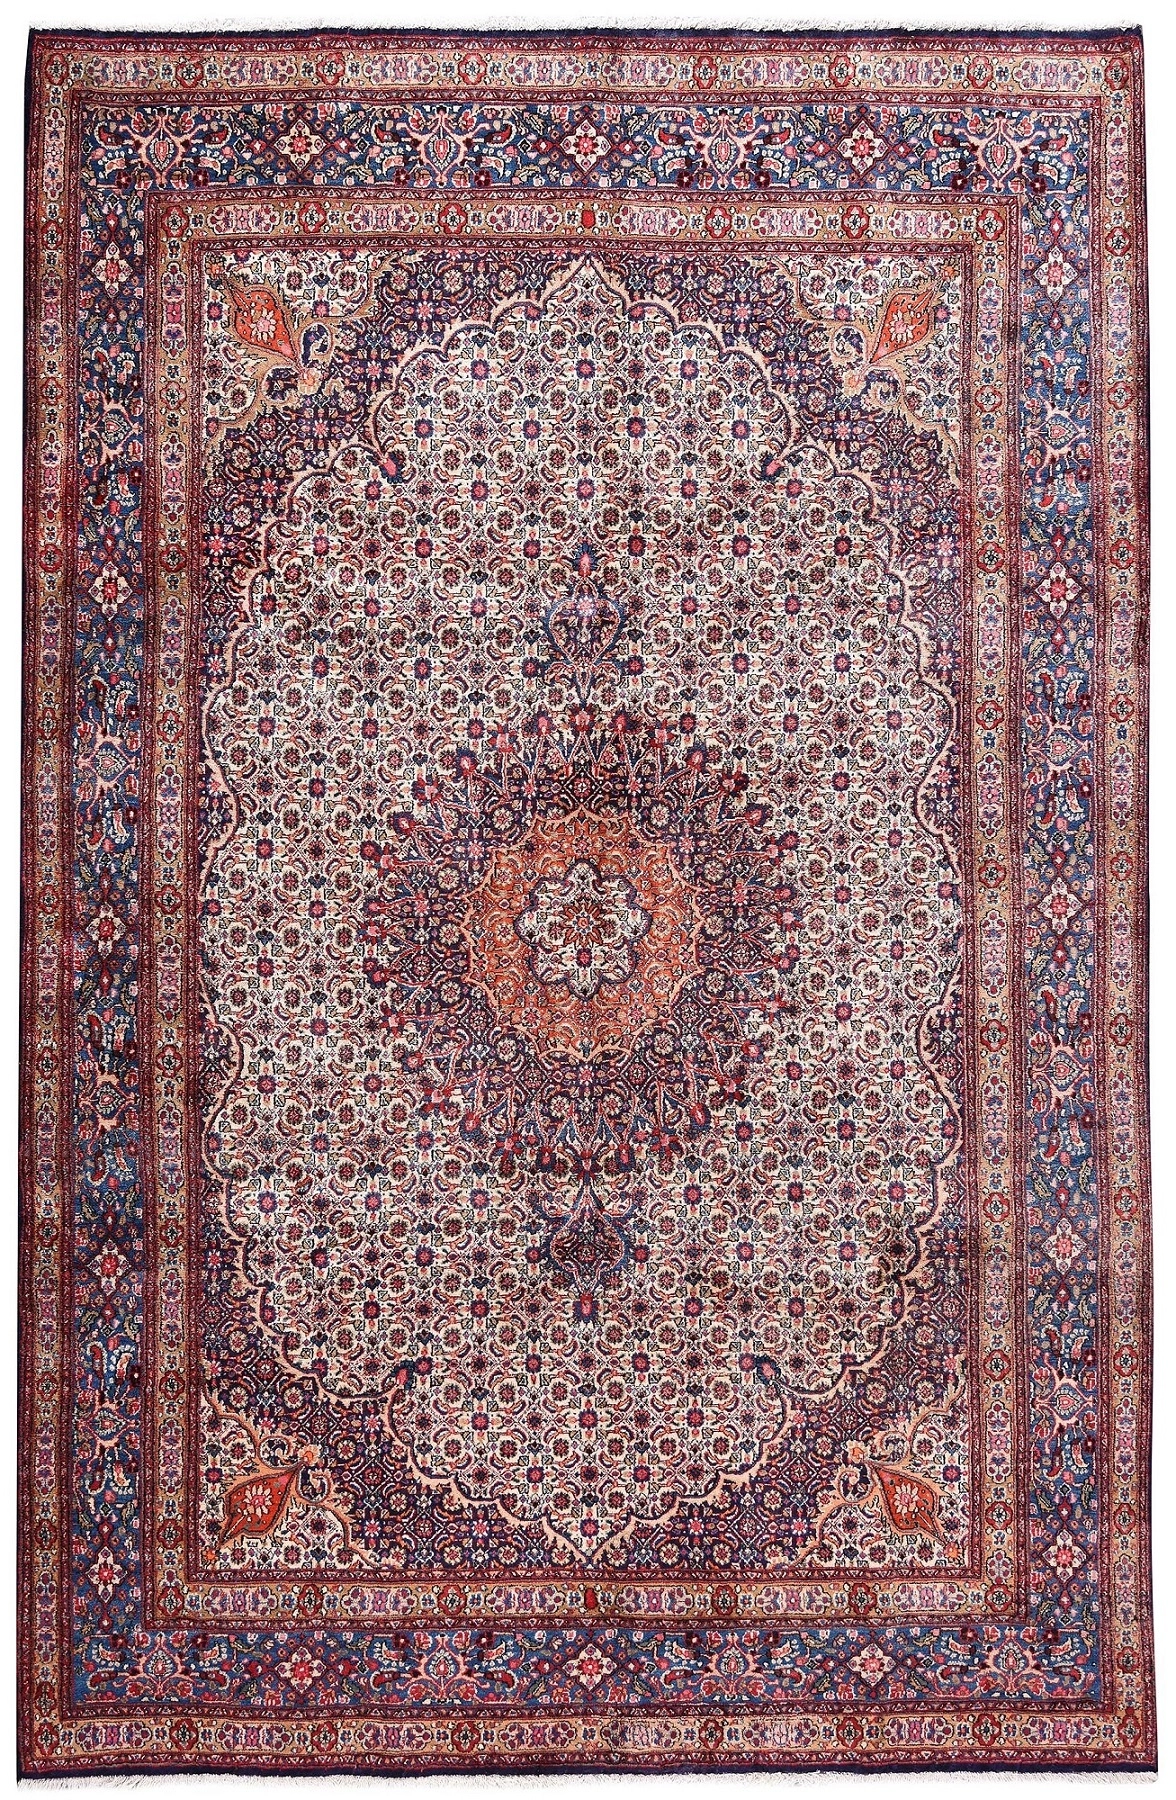 Handmade MUD Persian Rug for sale DR302-5418